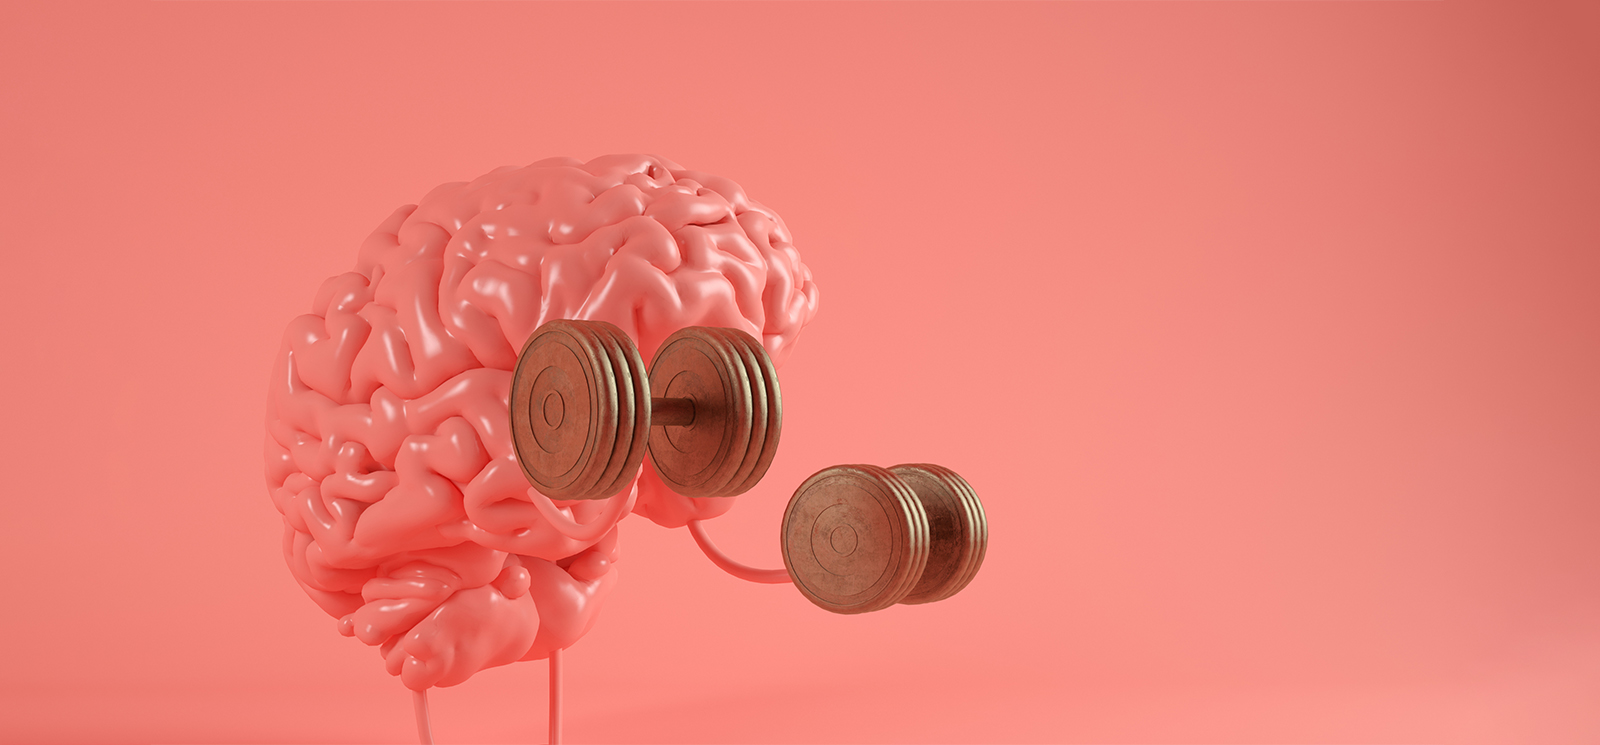 A brain with dumbbells on a pink background